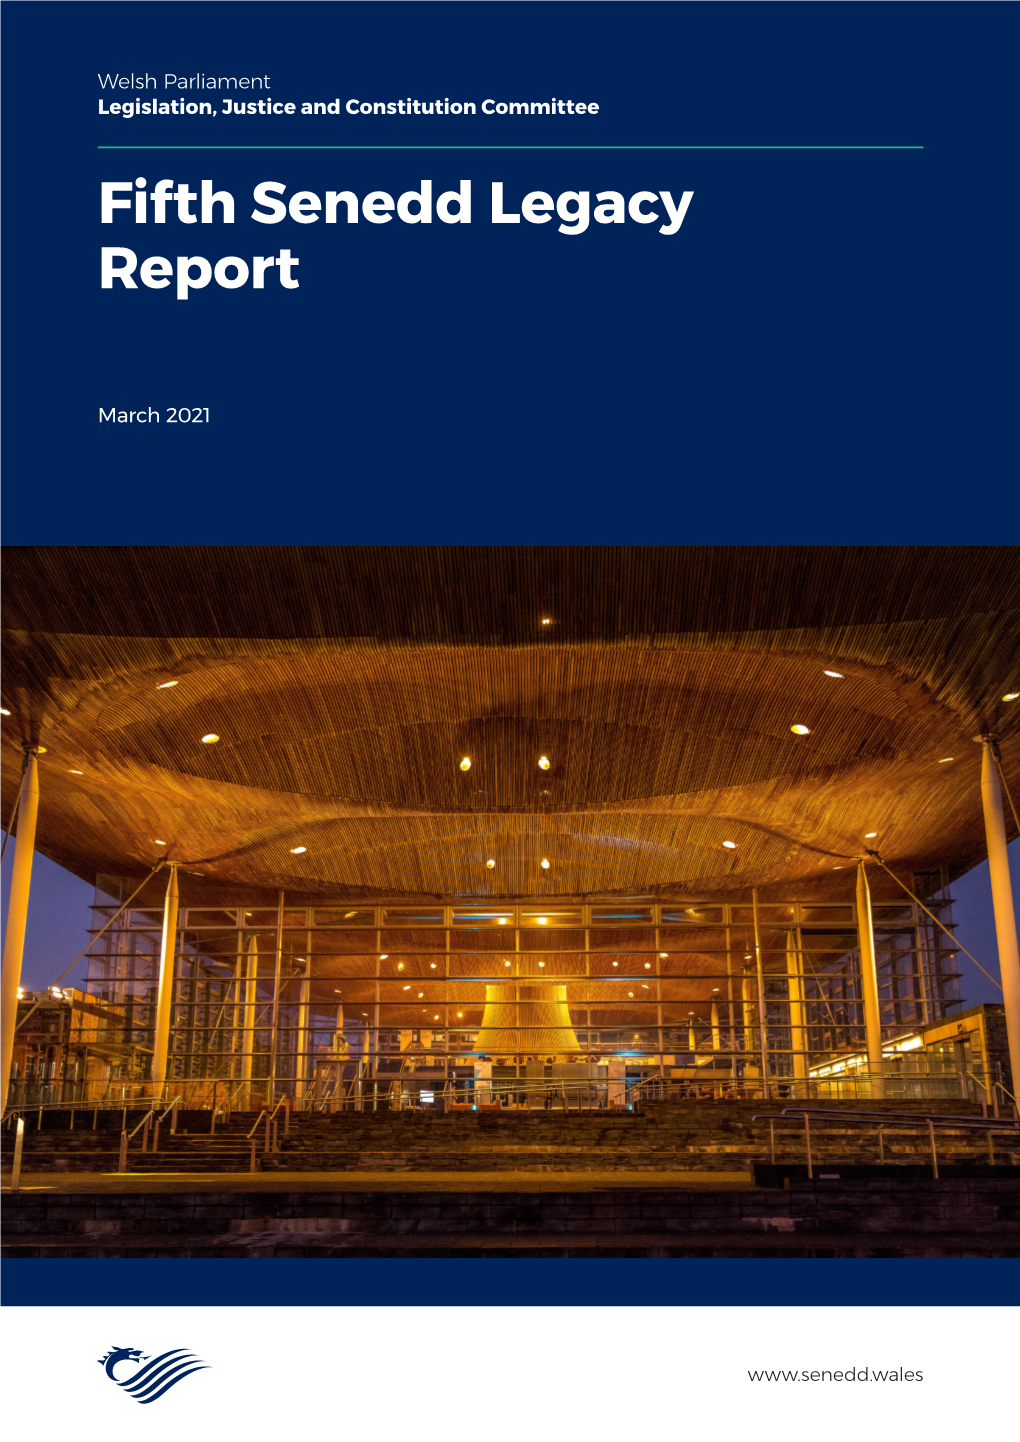 Legislation, Justice and Constitution Committee: Fifth Senedd Legacy